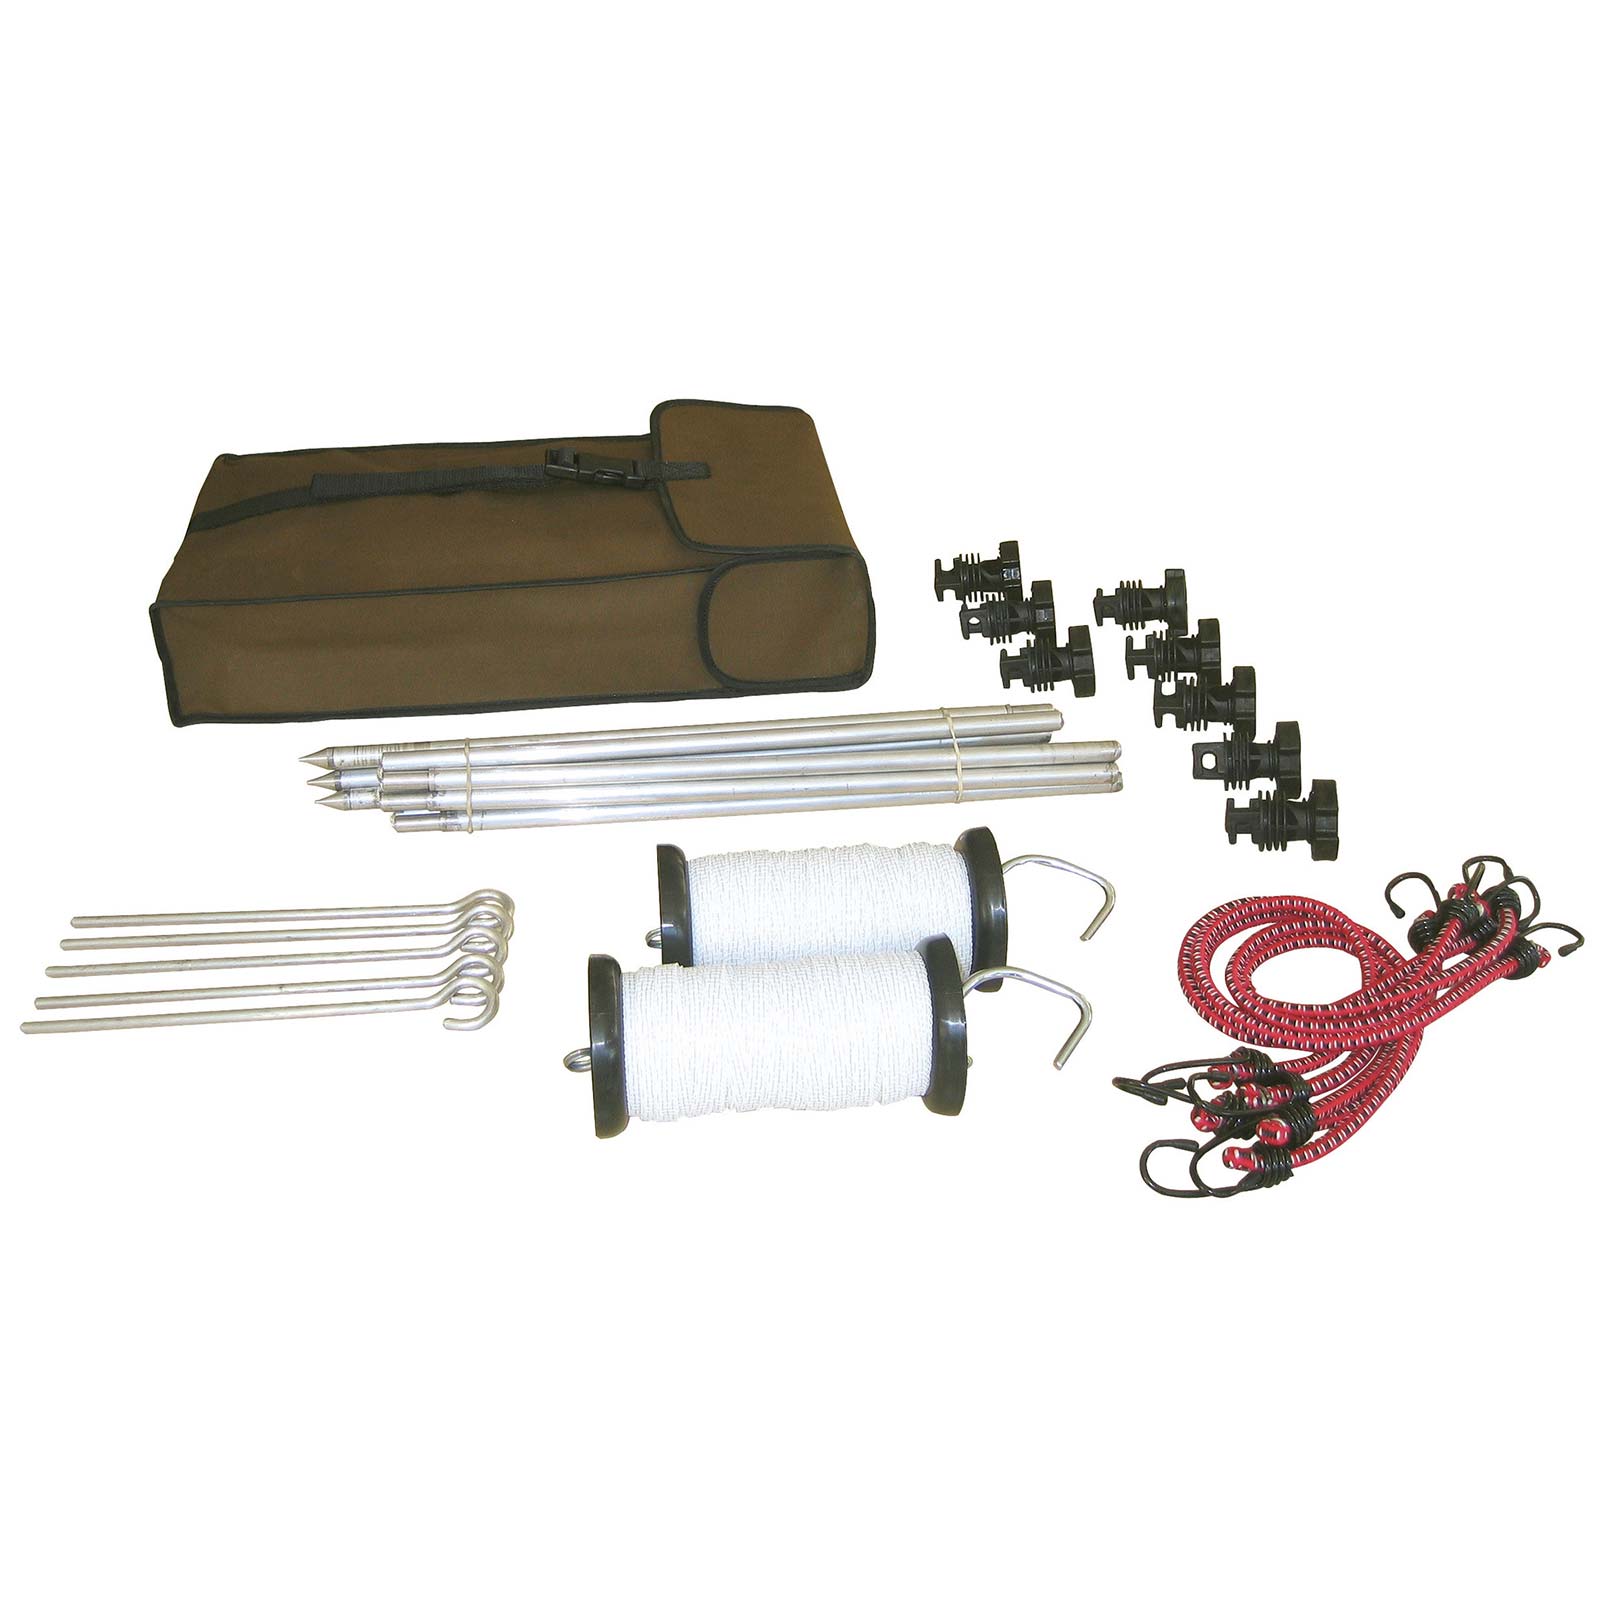 Portable fence kit f. trekking complete with energizer B40